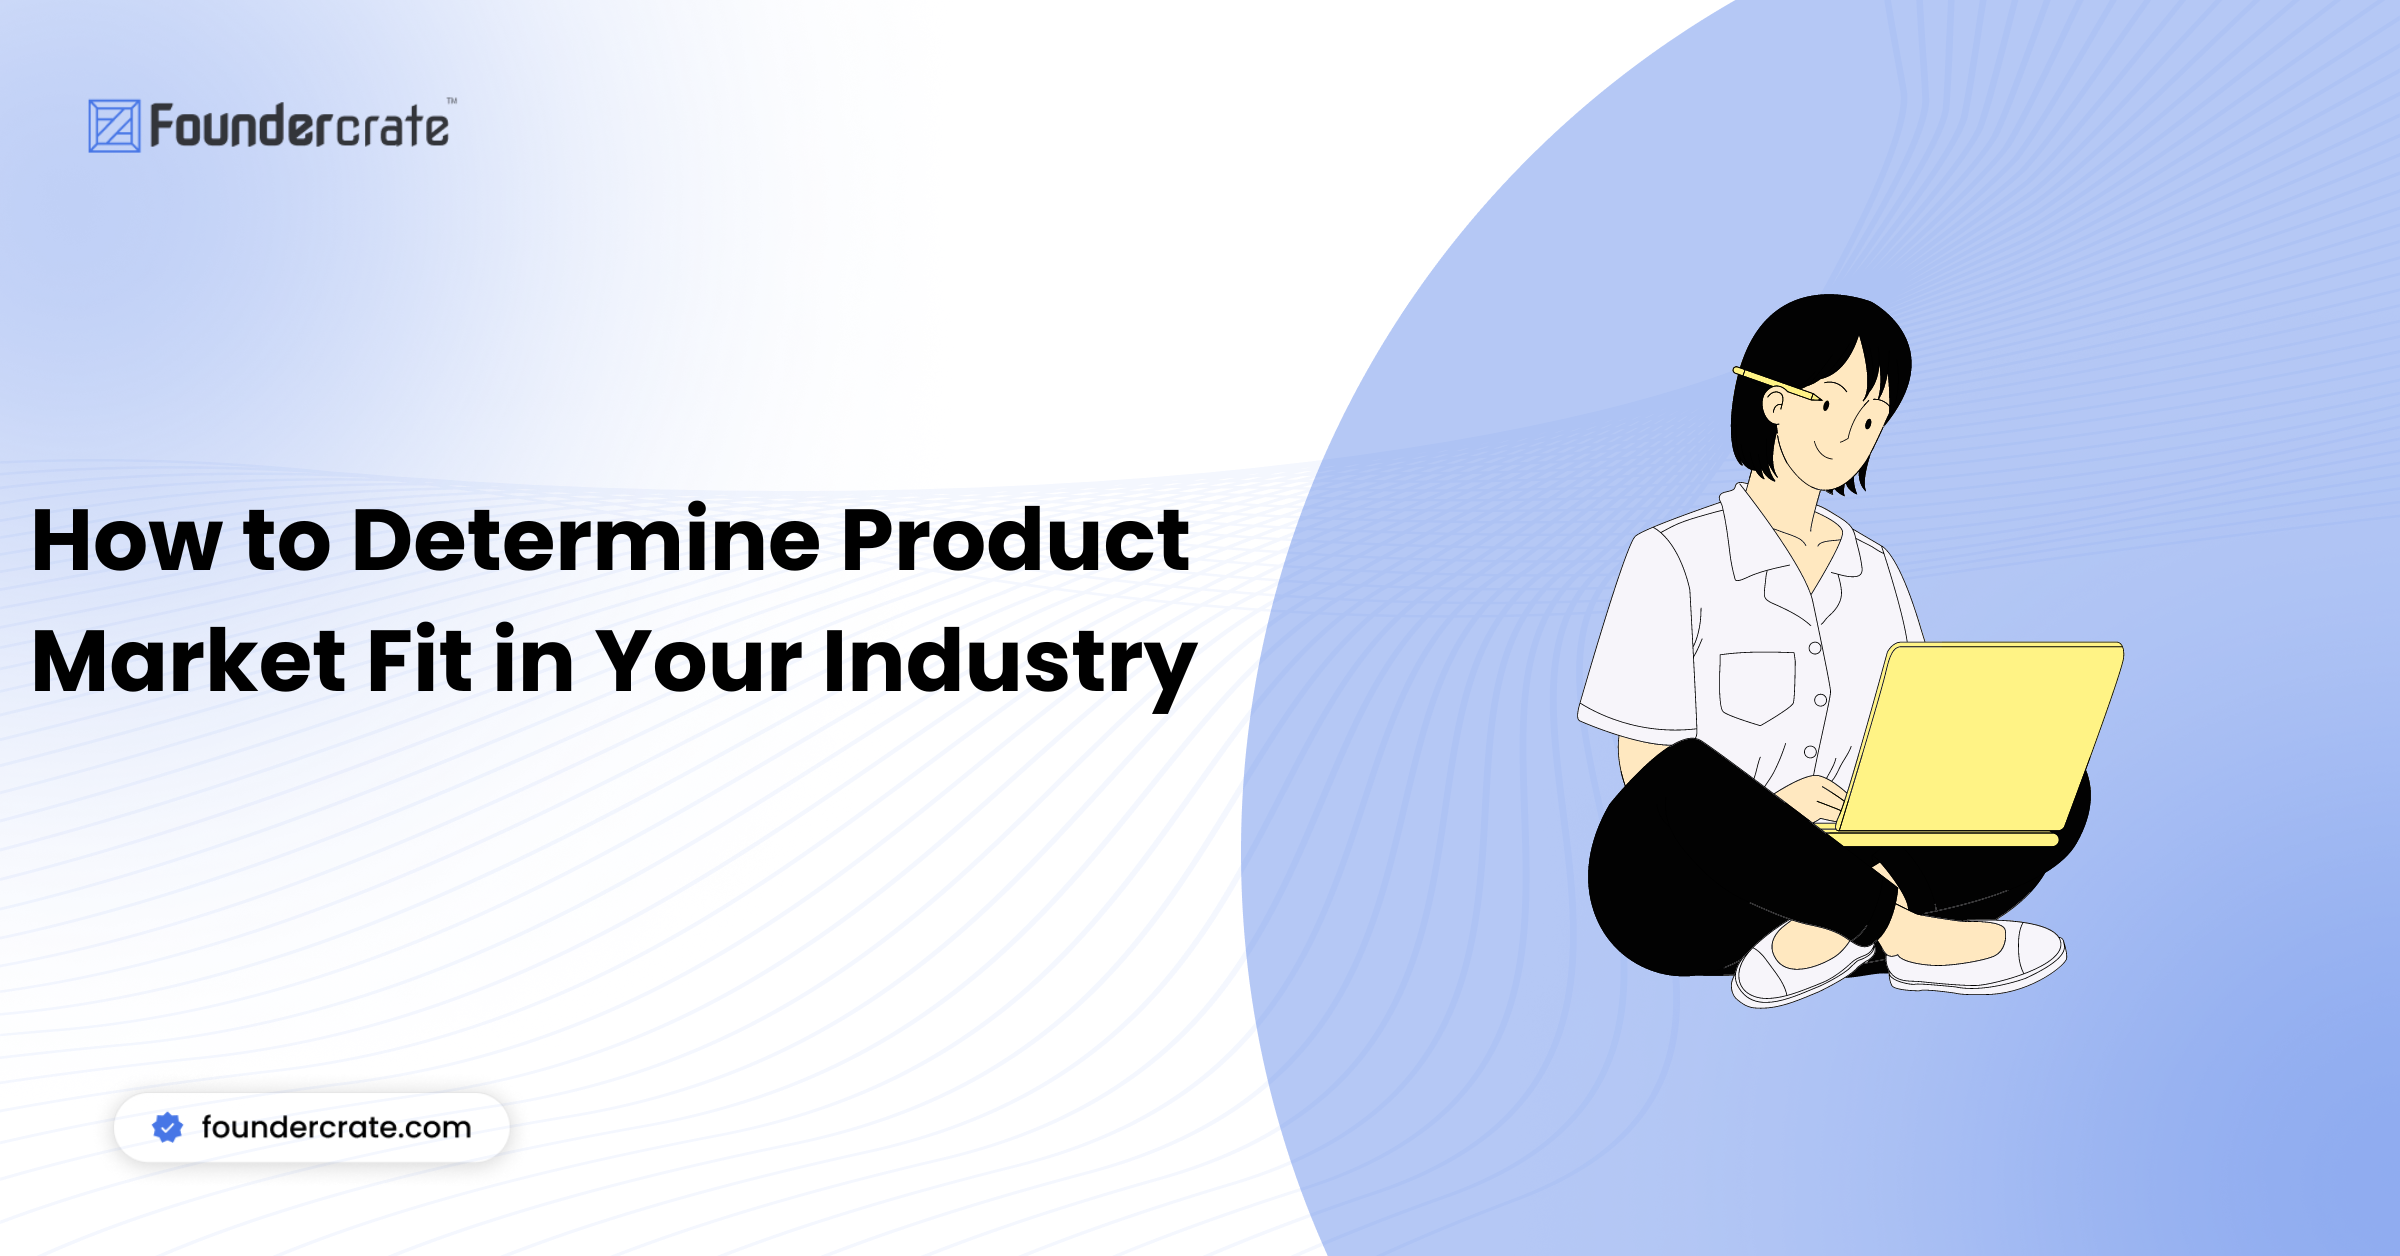 How to Determine Product Market Fit in Your Industry